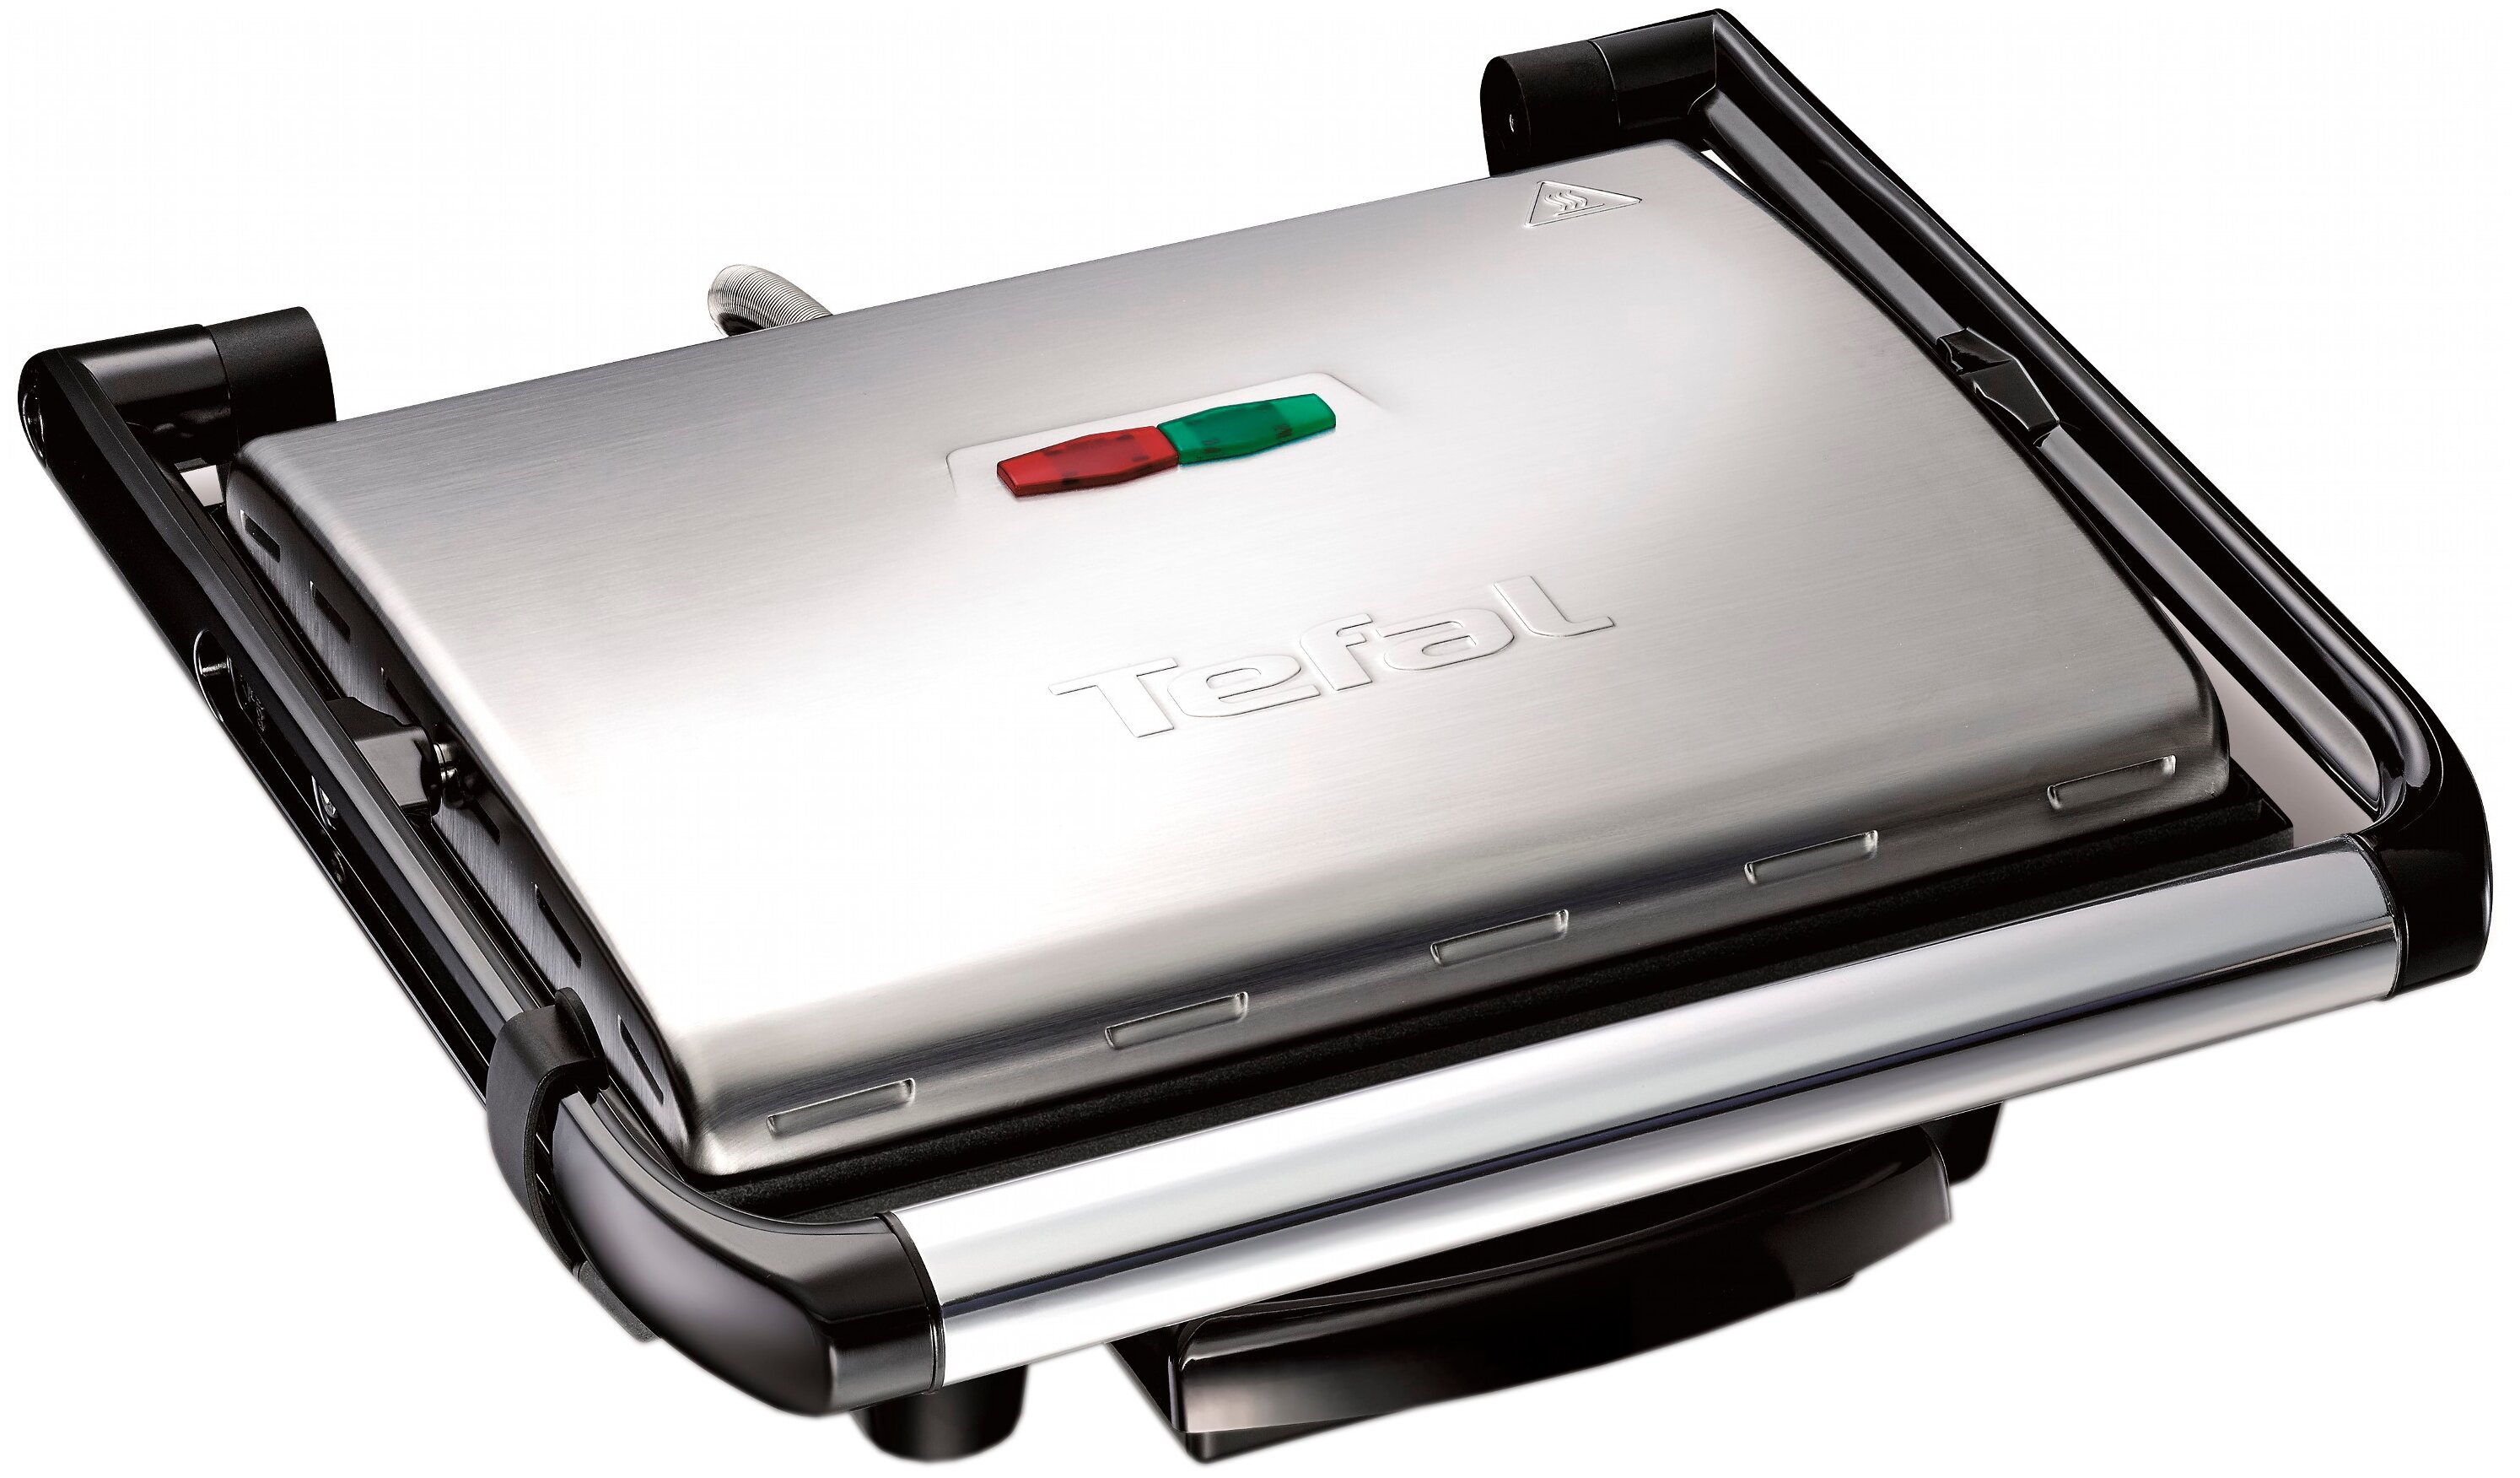 Grill gc241d